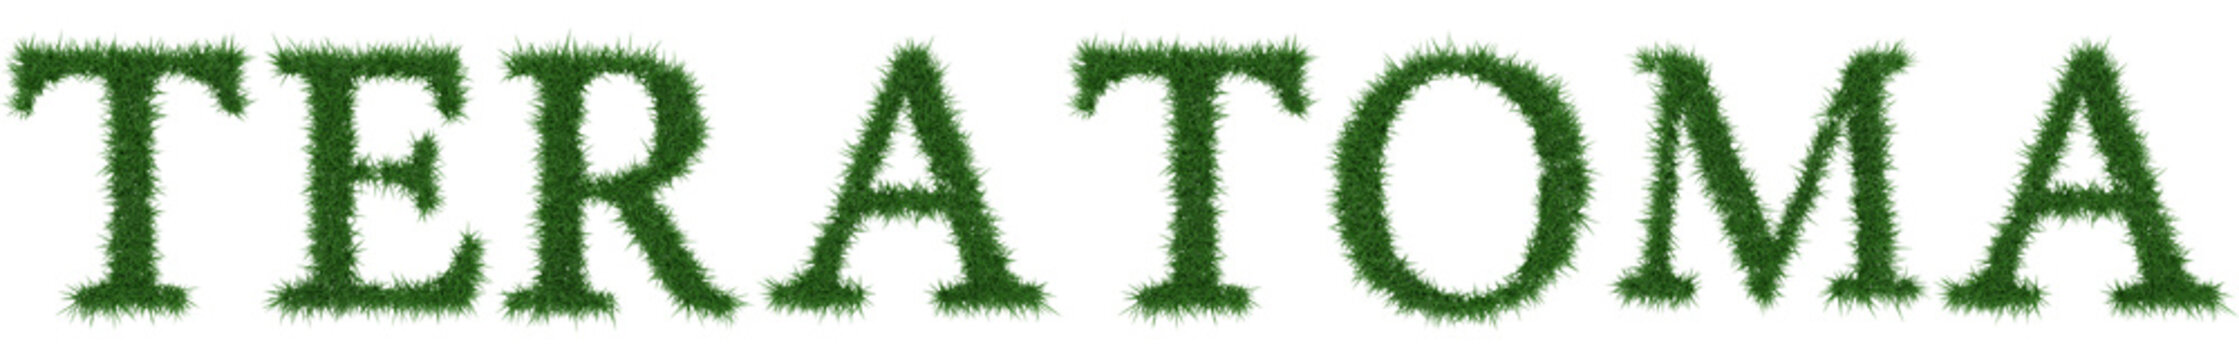 Teratoma - 3D rendering fresh Grass letters isolated on whhite background.